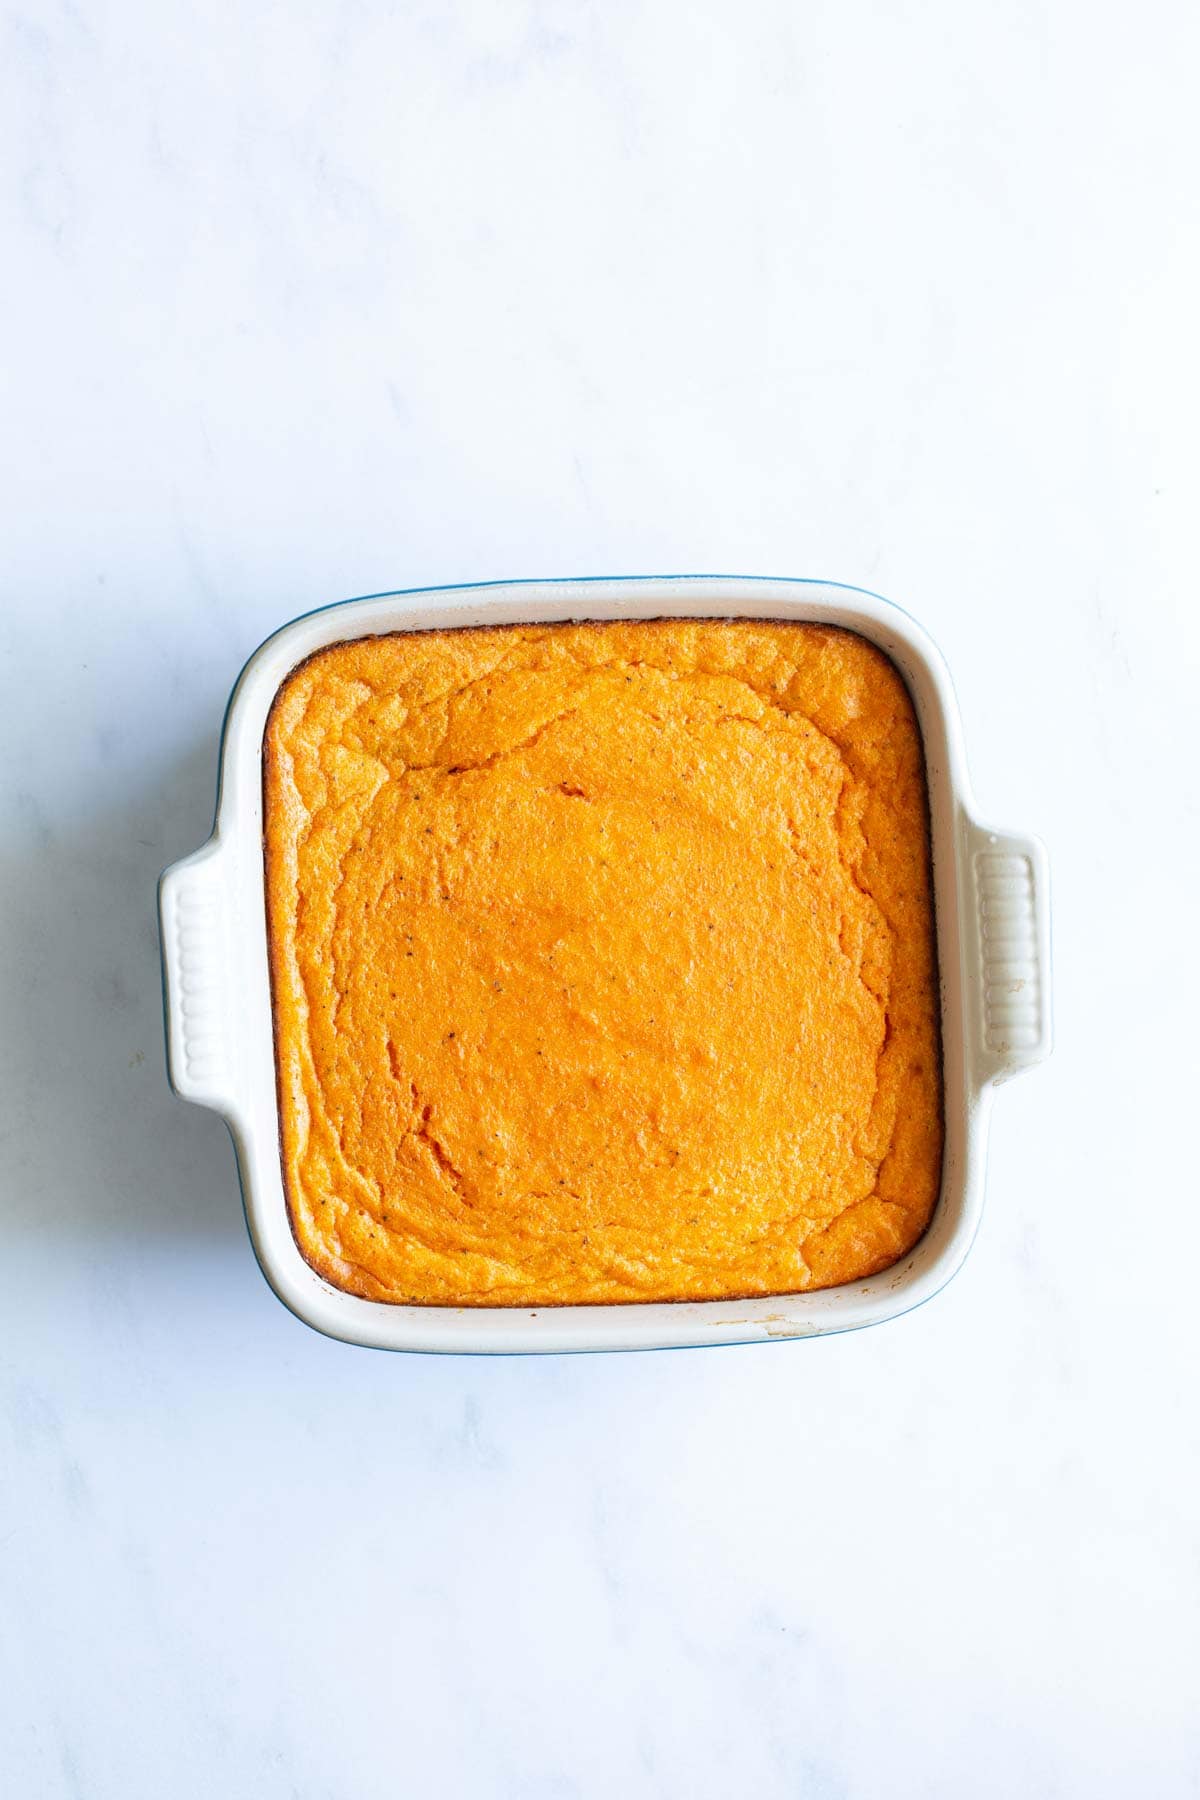 A baking dish filled with carrot souffle on a white surface.